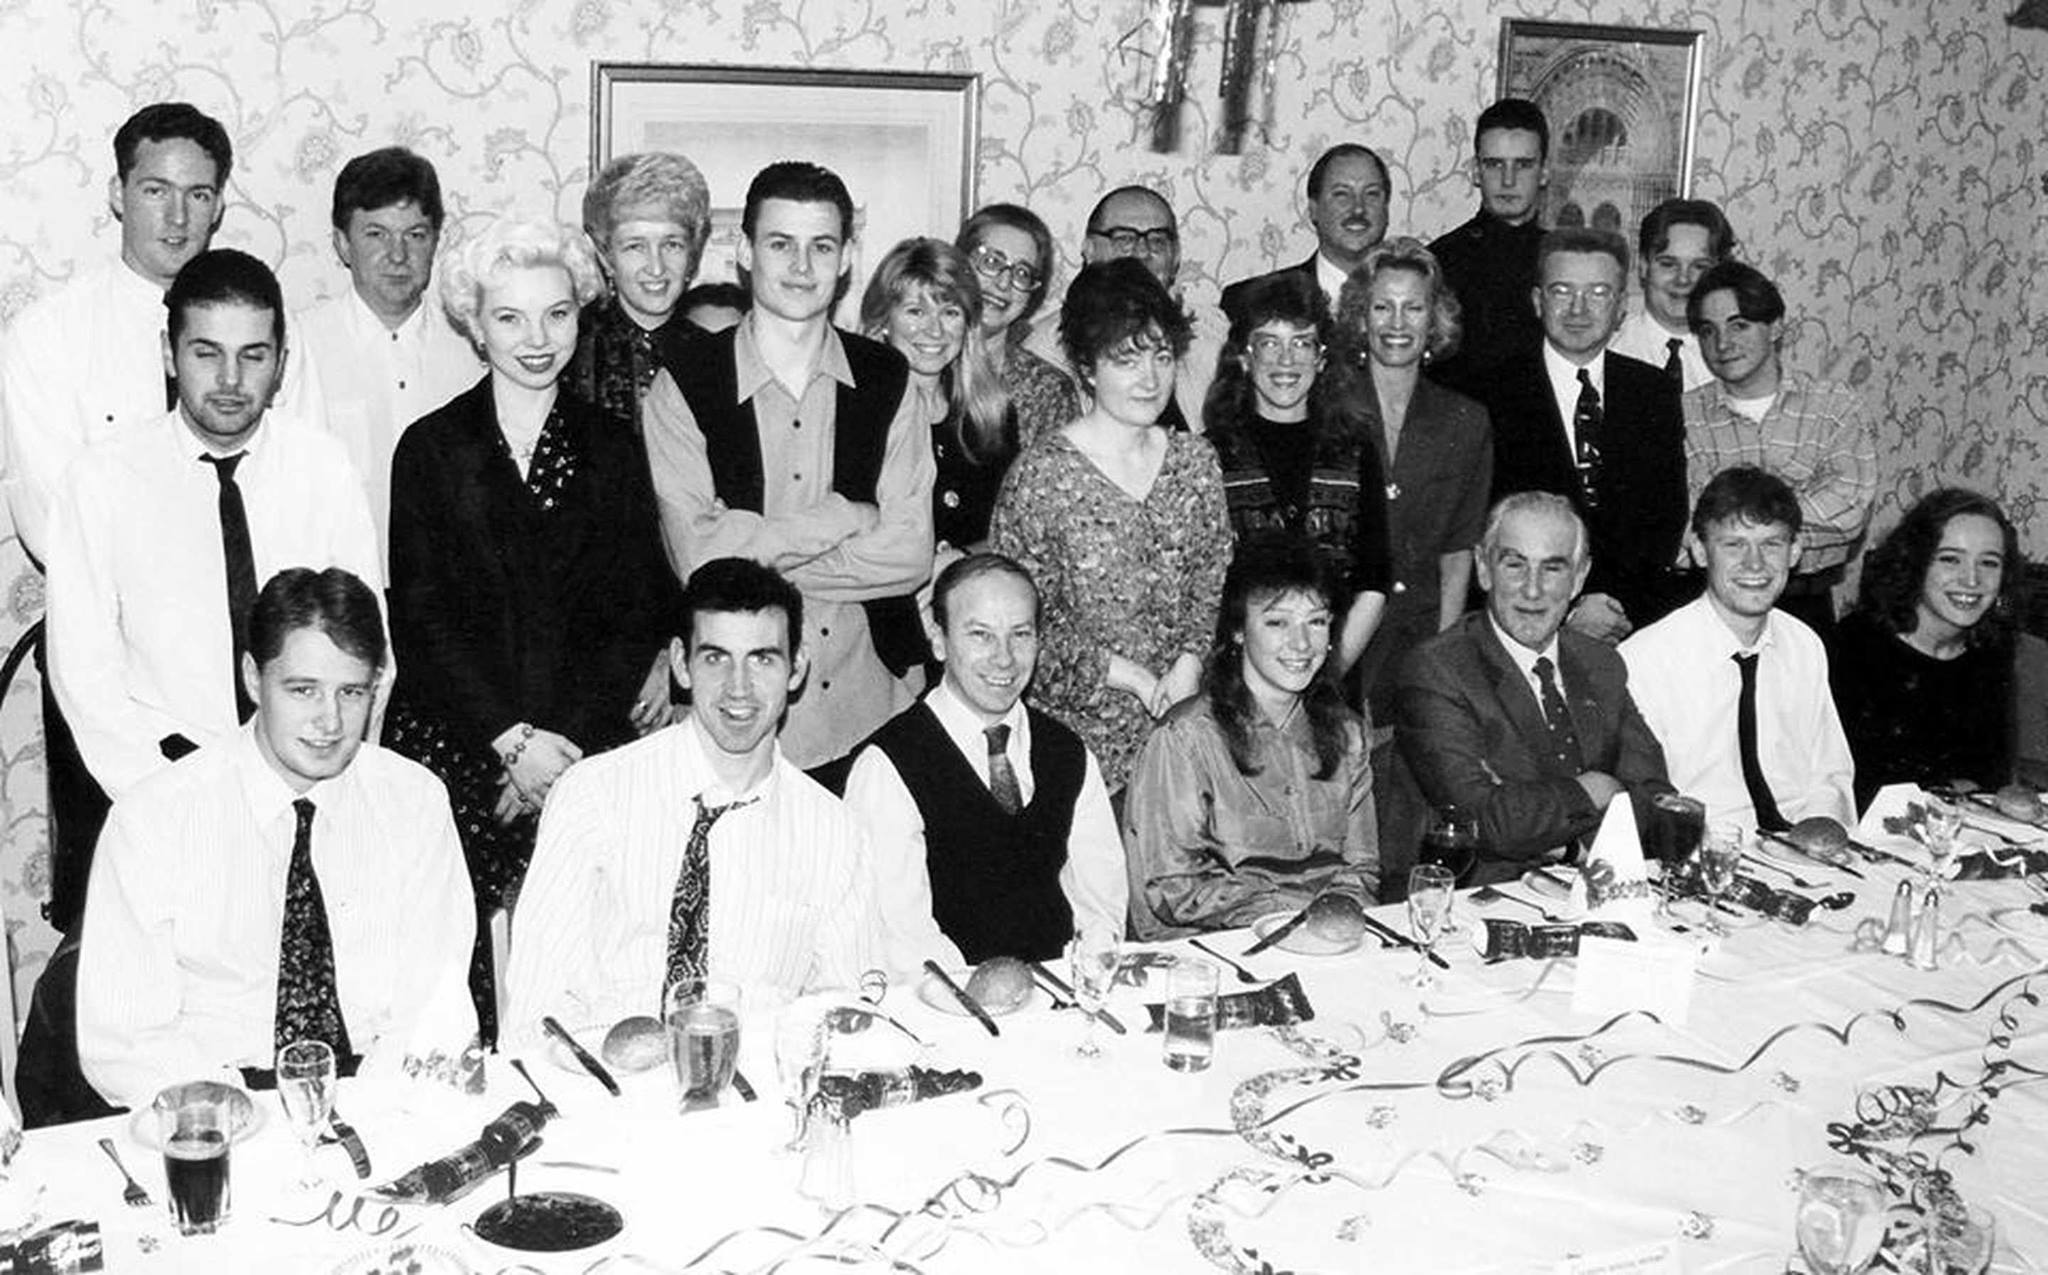 Southport Visiter staff in the 1990s including Mike Hill. Julia Ray, Angela Birchall, Angela Duffell, Hilda Garner, Sarah and John Dempsey, Jan Nethercote, Rob Hopkins, Rob Fitzpatrick, Viv Campbell, and Gareth Jones